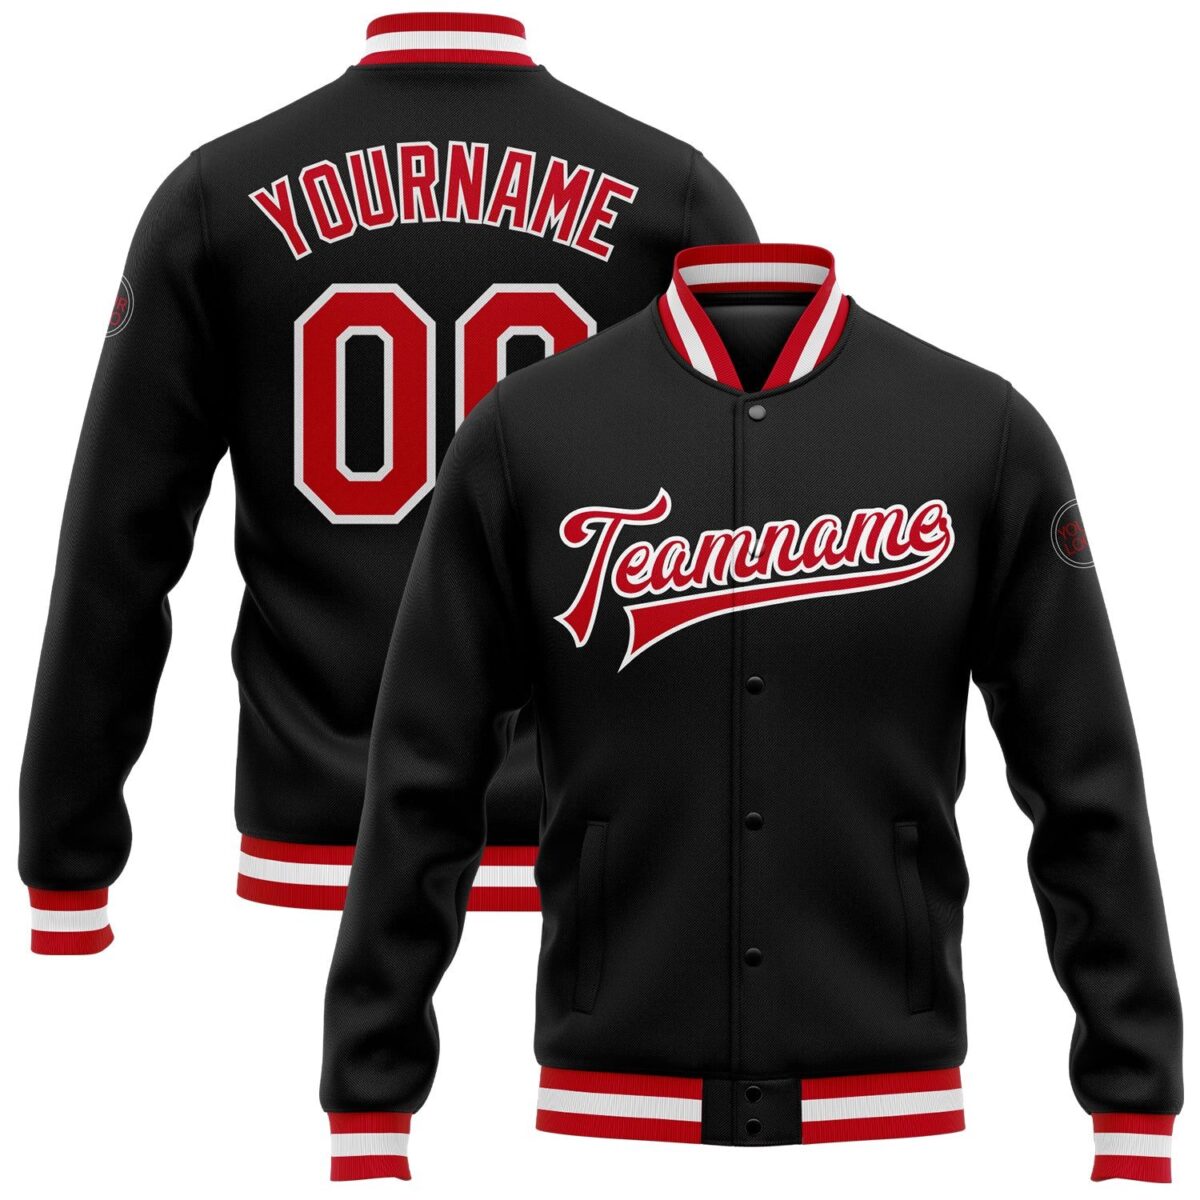 College Baseball Jacket with black & Red 1